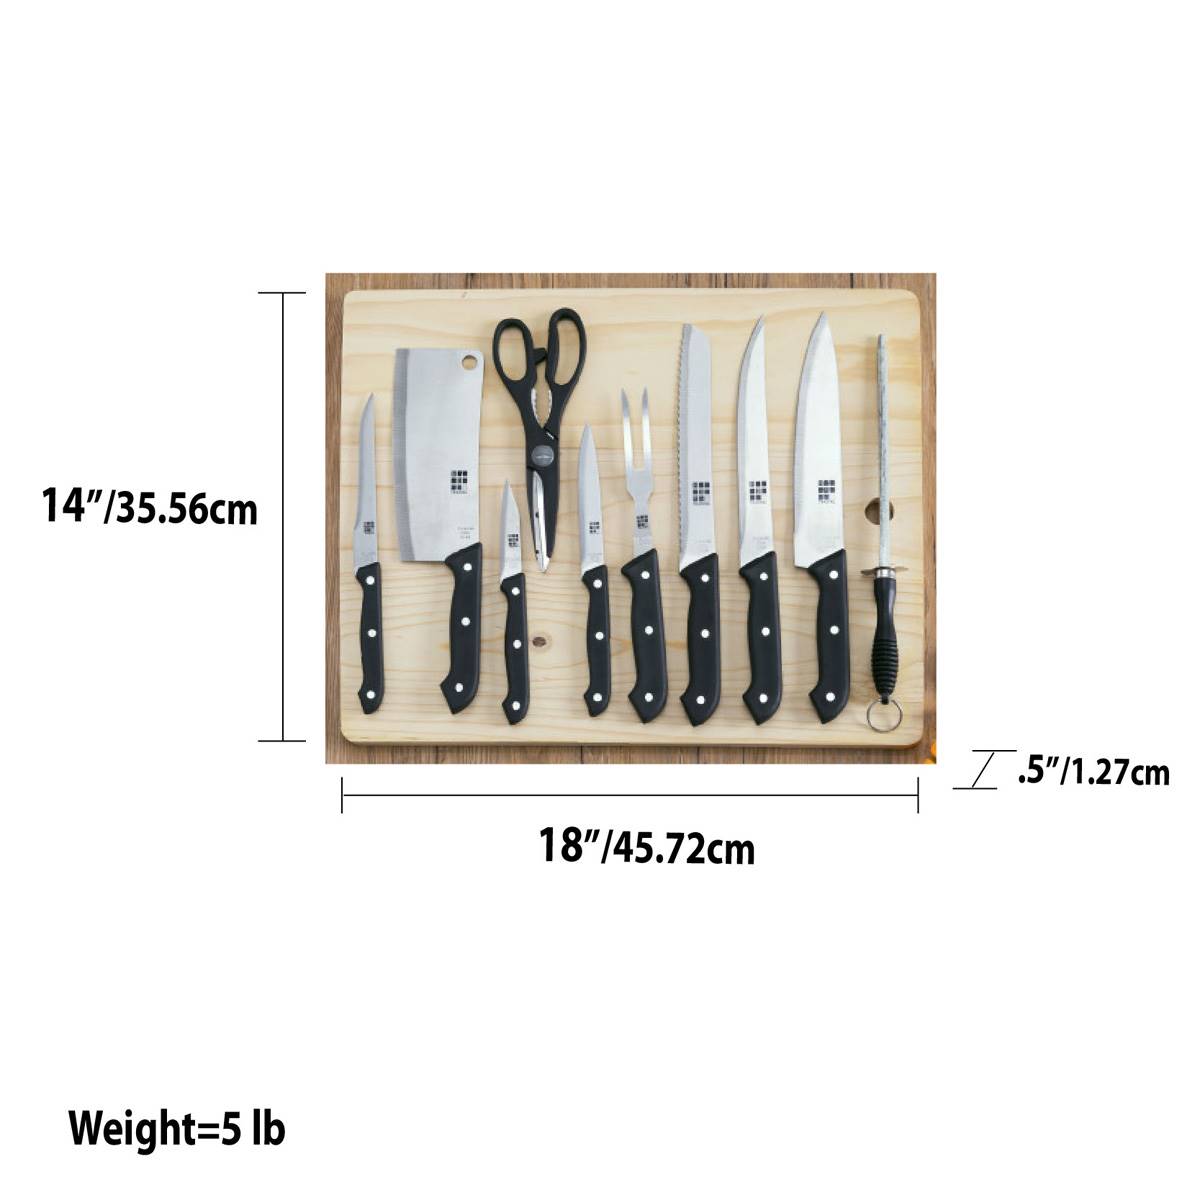 Home Basics 10pc. Knife Set With Cutting Board